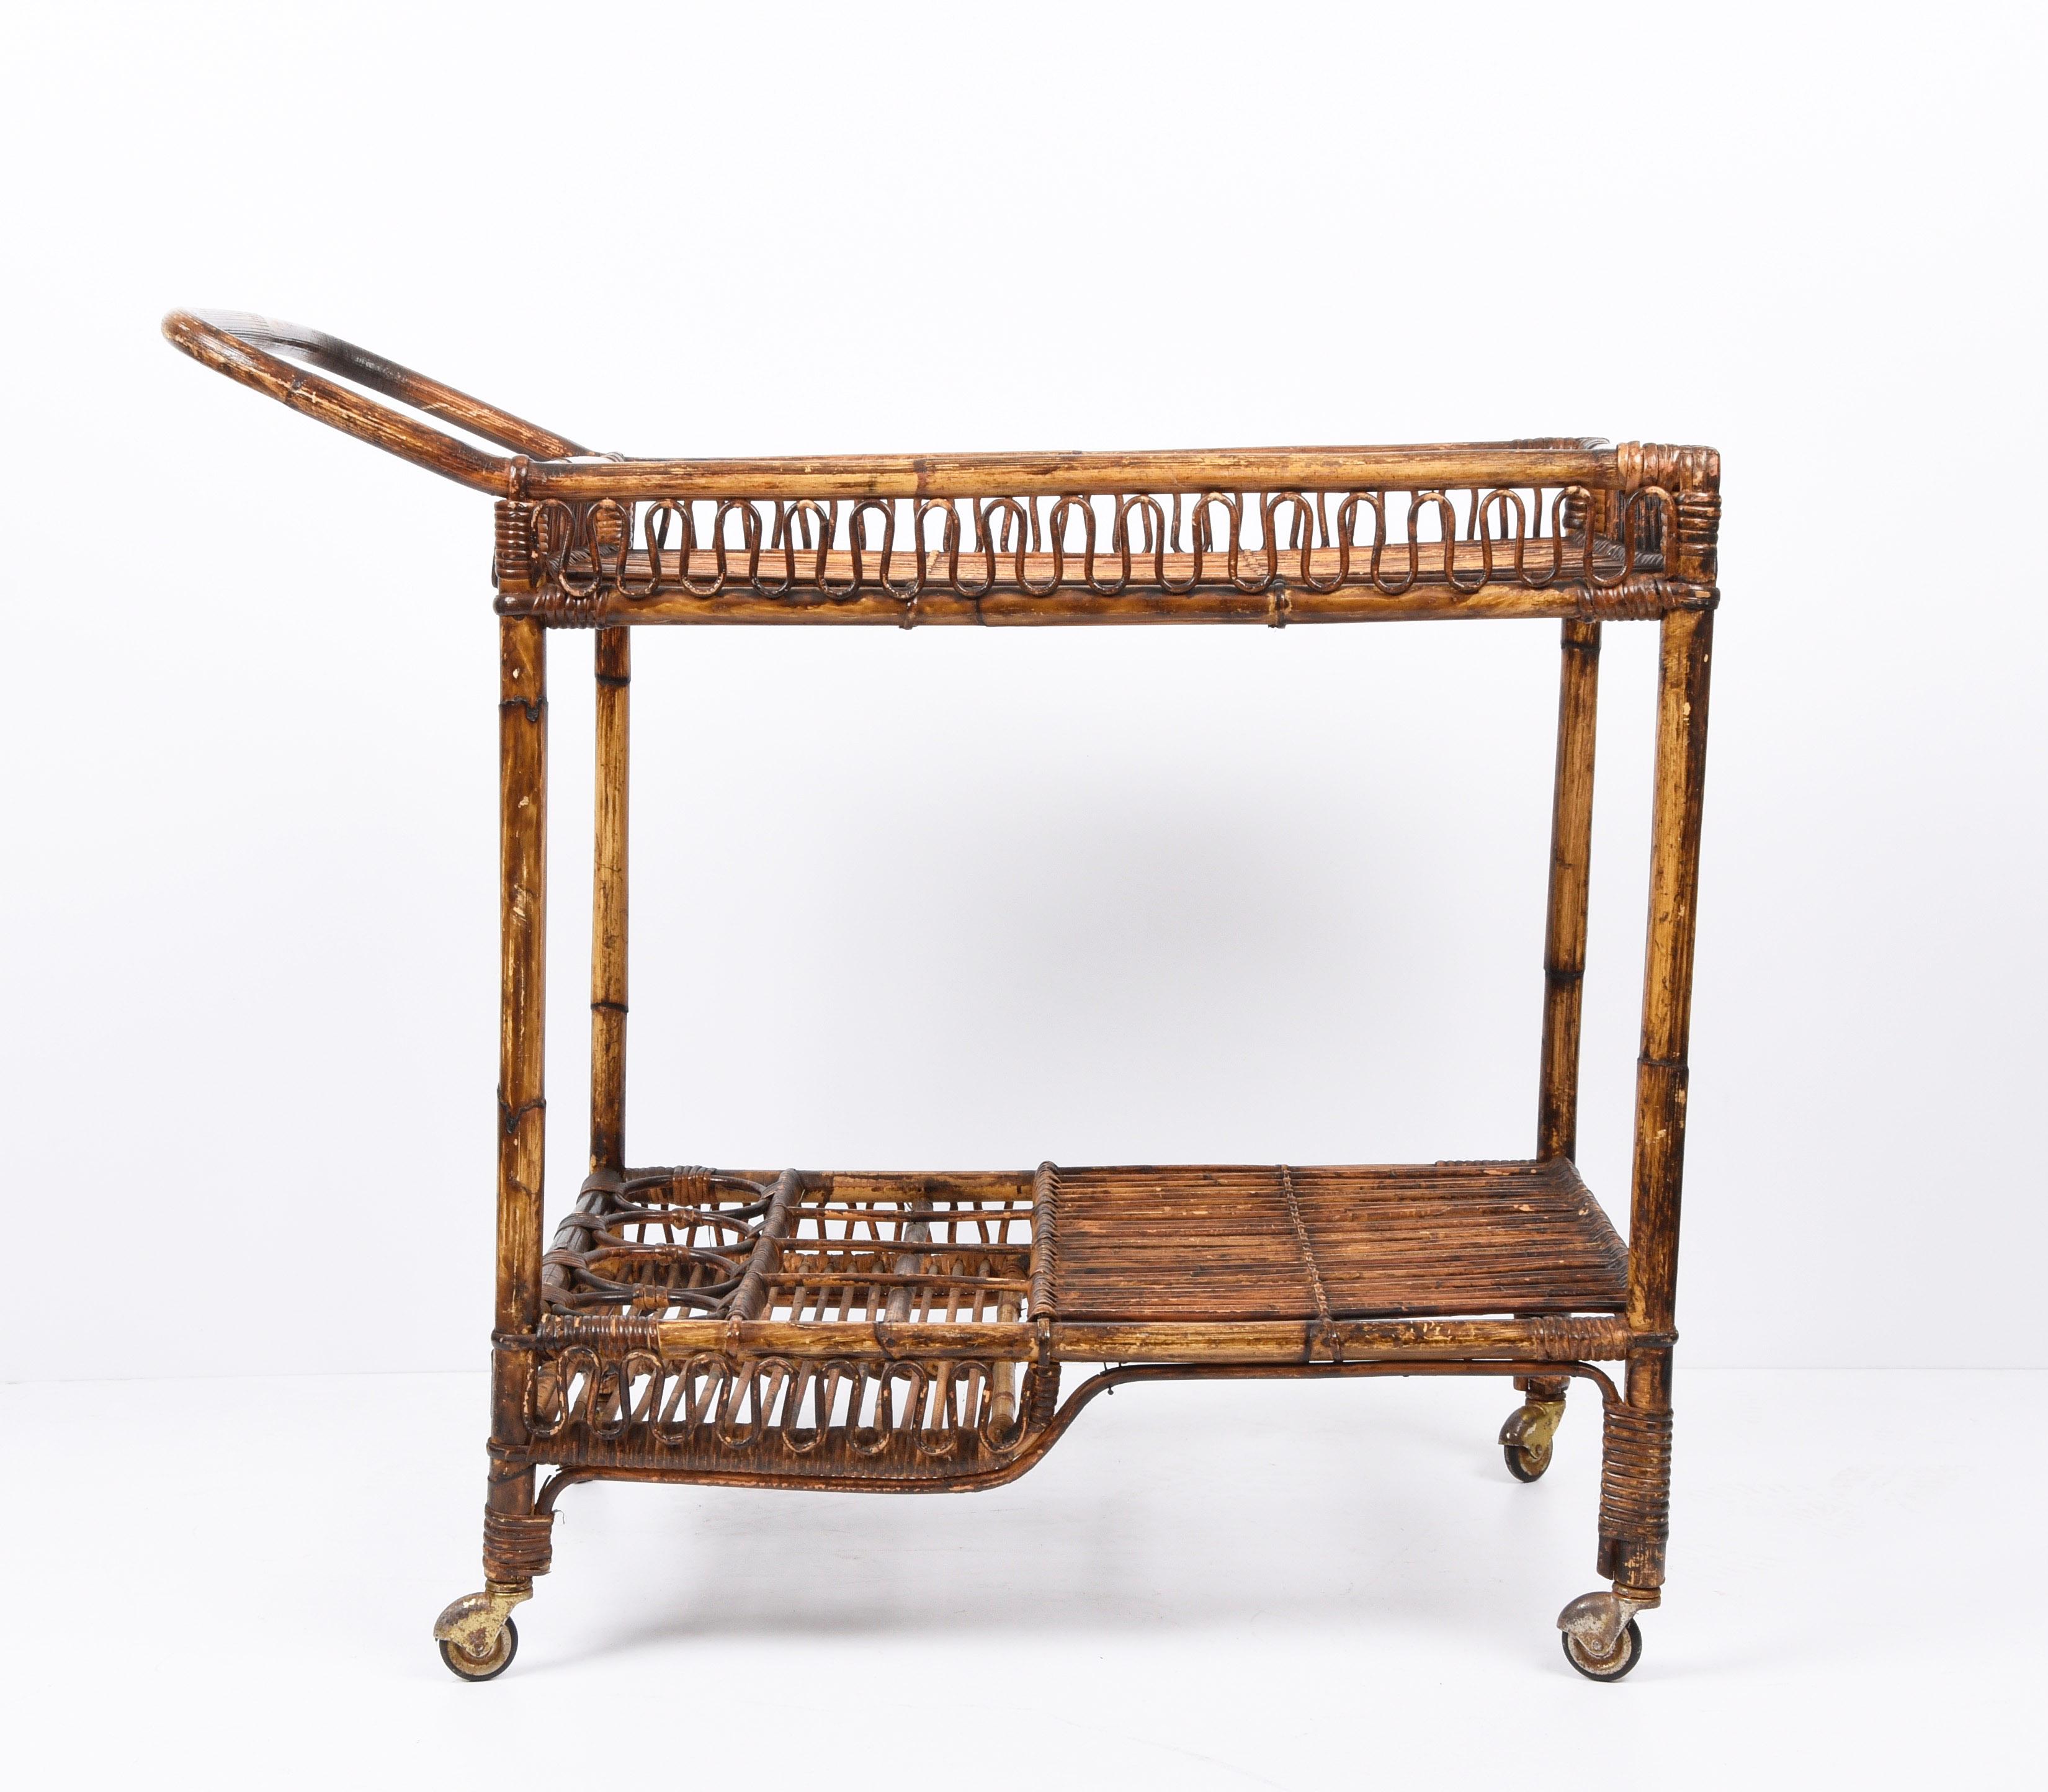 20th Century French Riviera Rectangular Bamboo and Rattan Trolley Bar Cart, France, 1960s